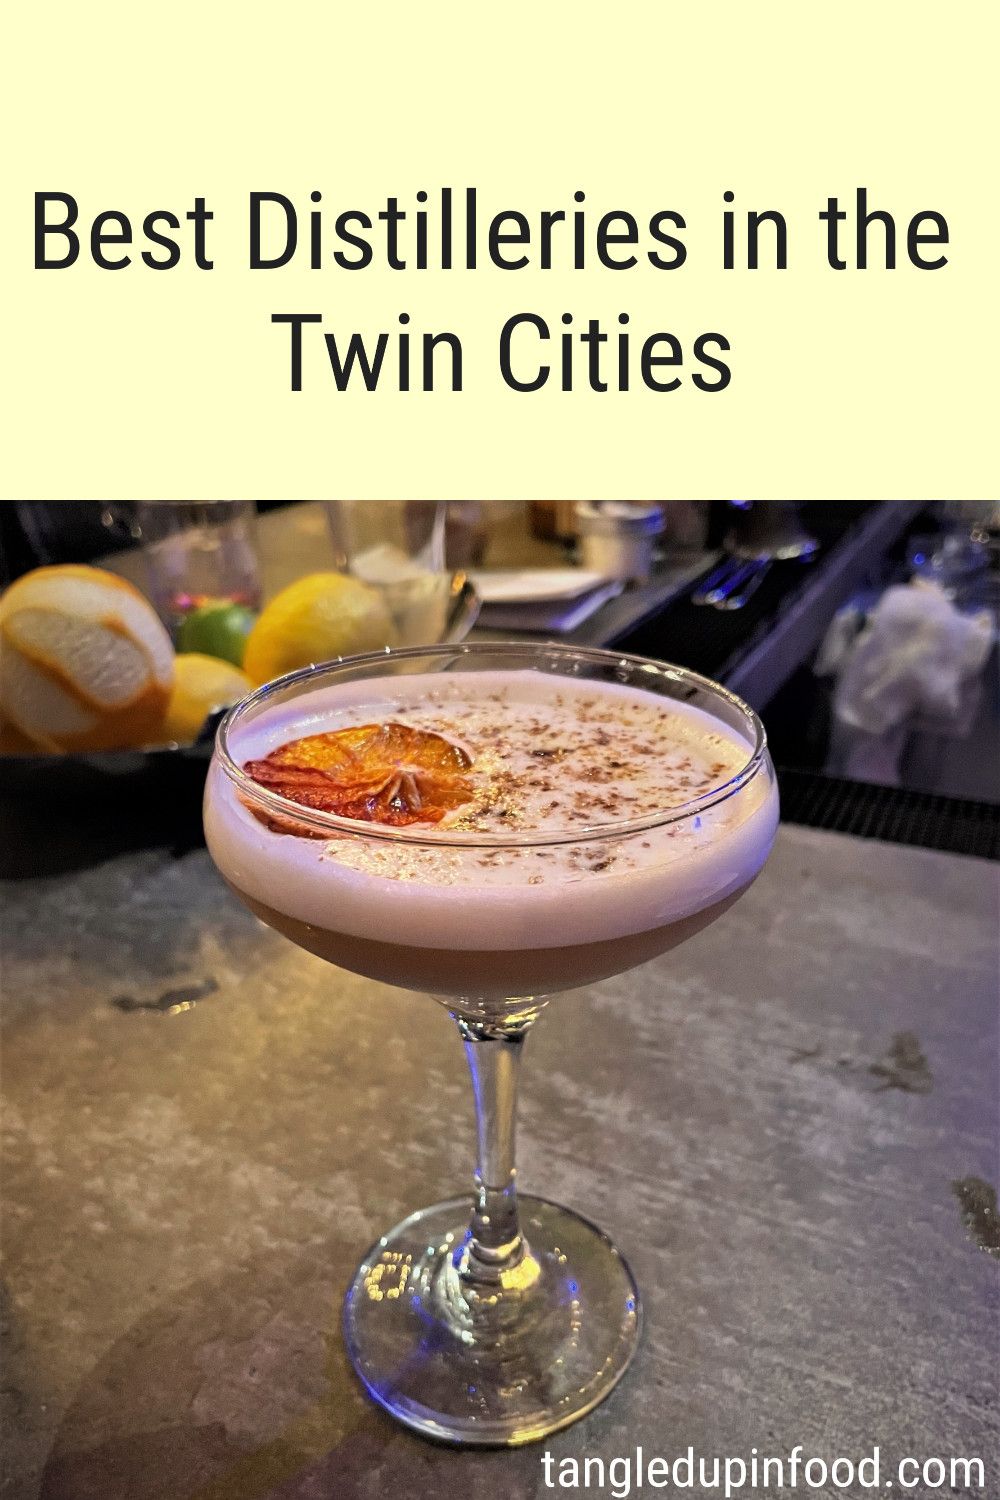 Photo of cocktail with text reading "Best Distilleries in the Twin Cities"